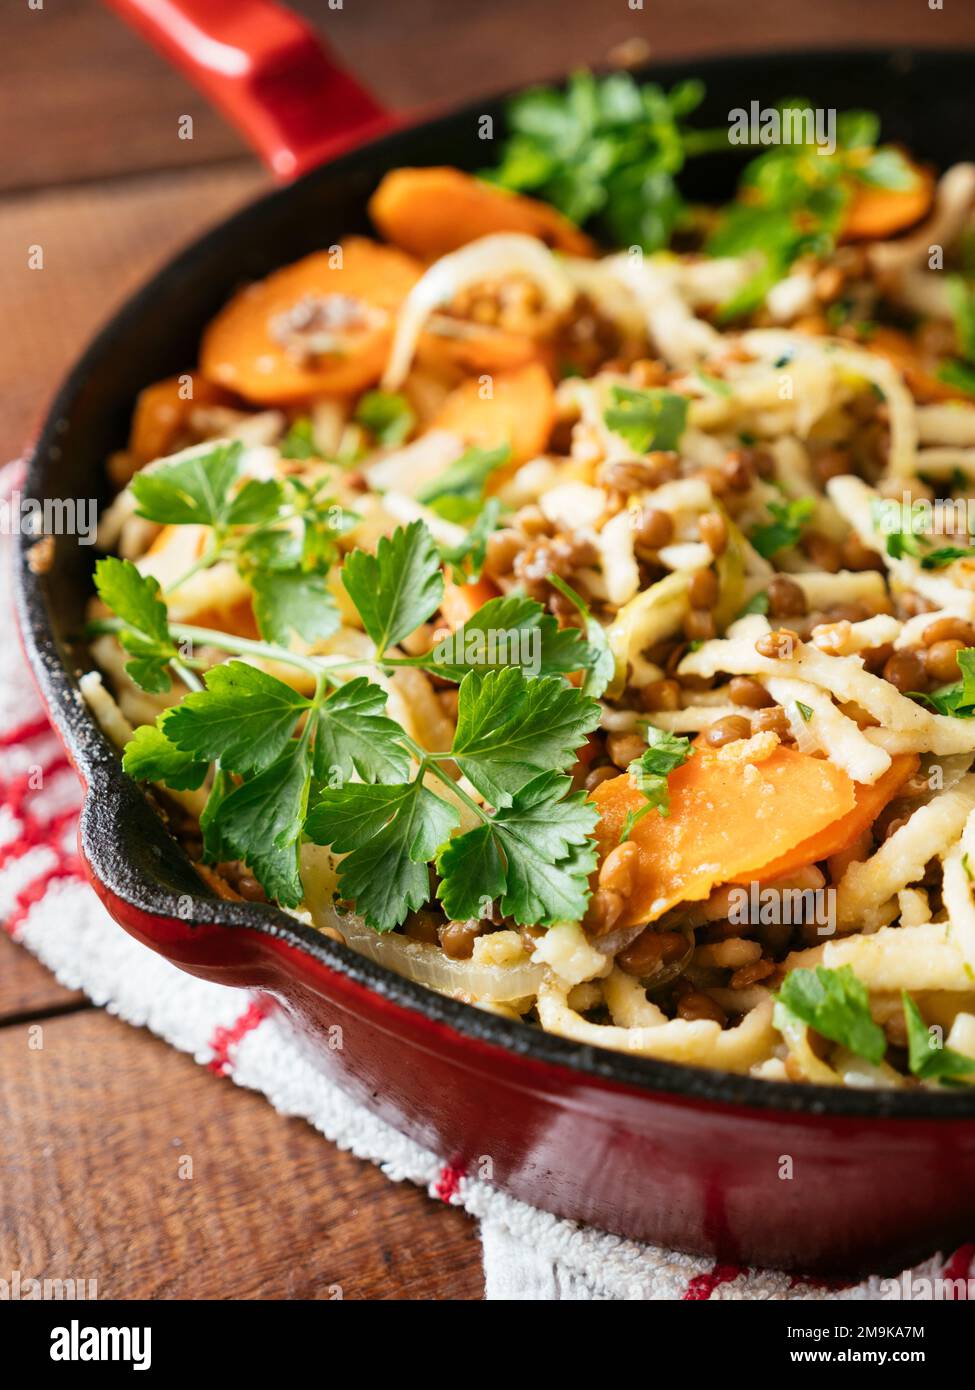 Carrots and Lentils with German Pasta (Spaetzle) in a cast iron pan. Stock Photo